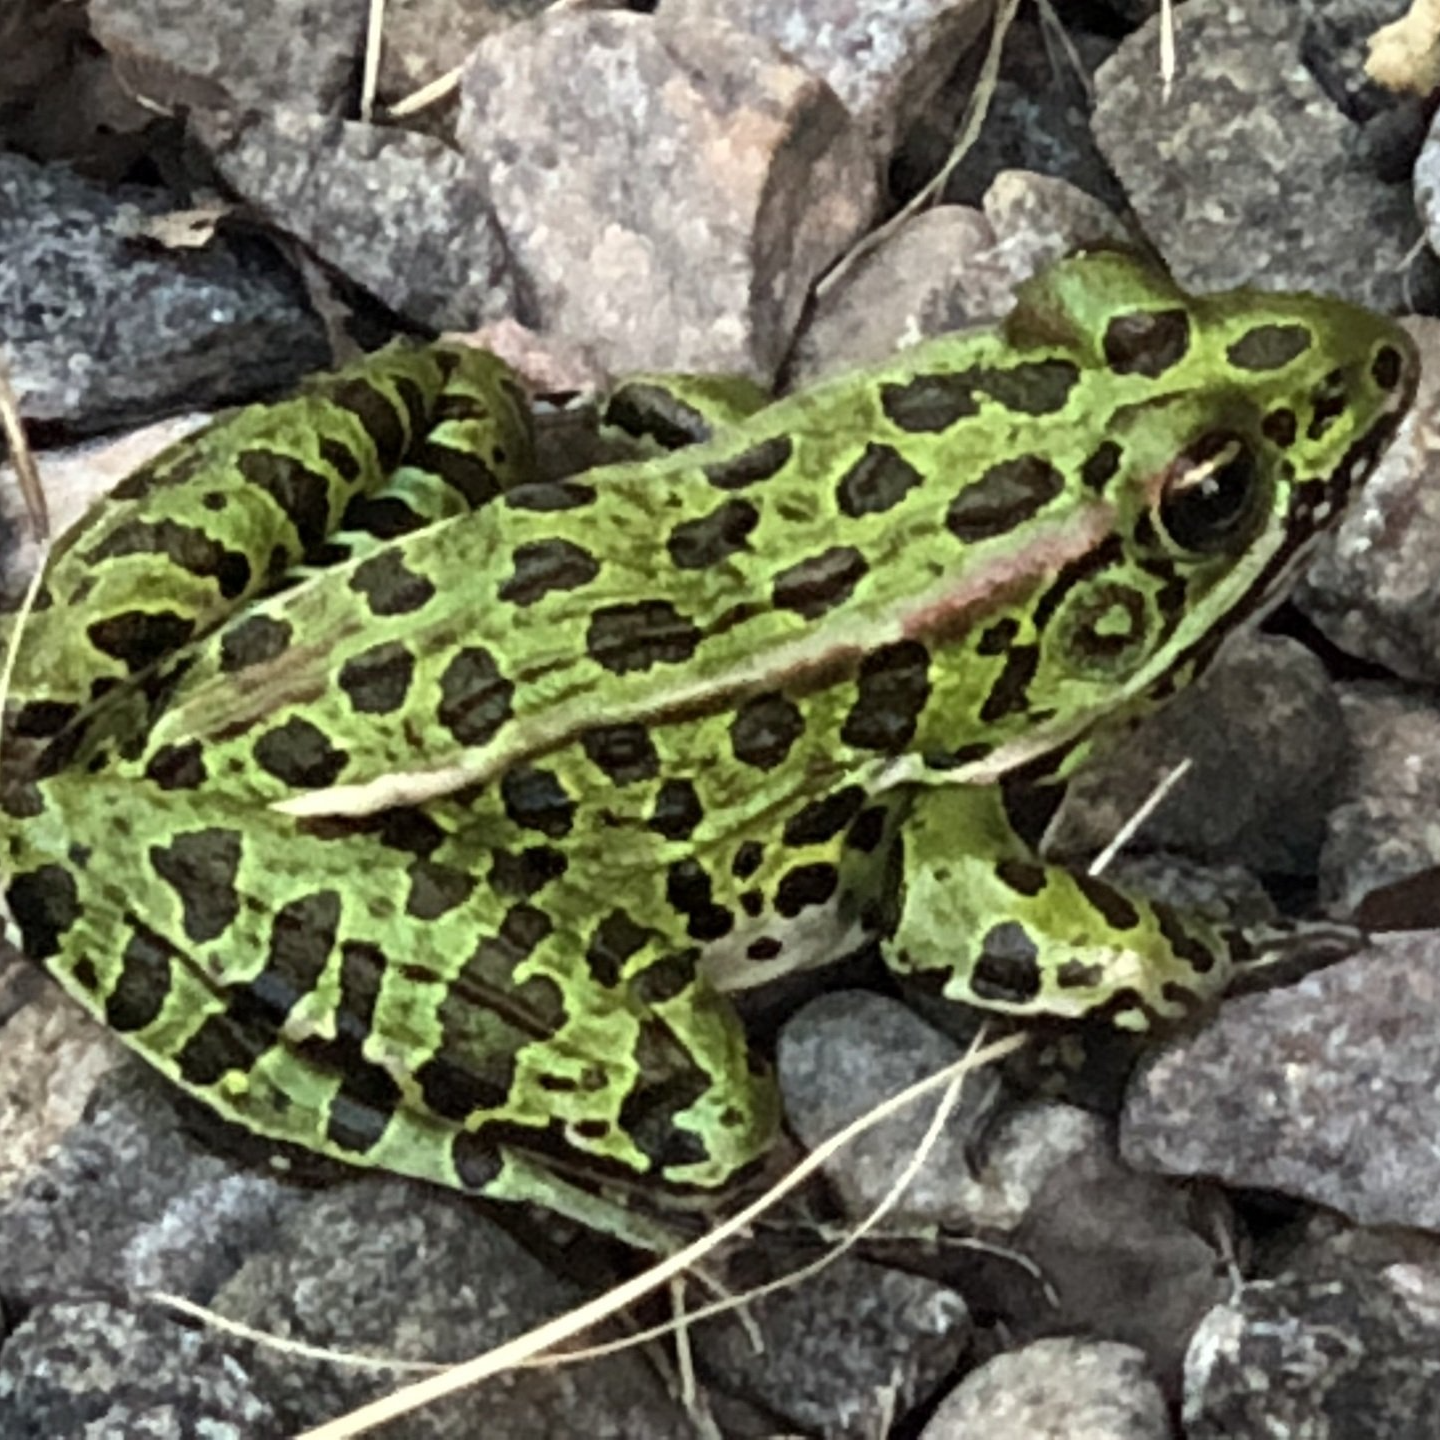 A green frog with black spots is laying on some rocks